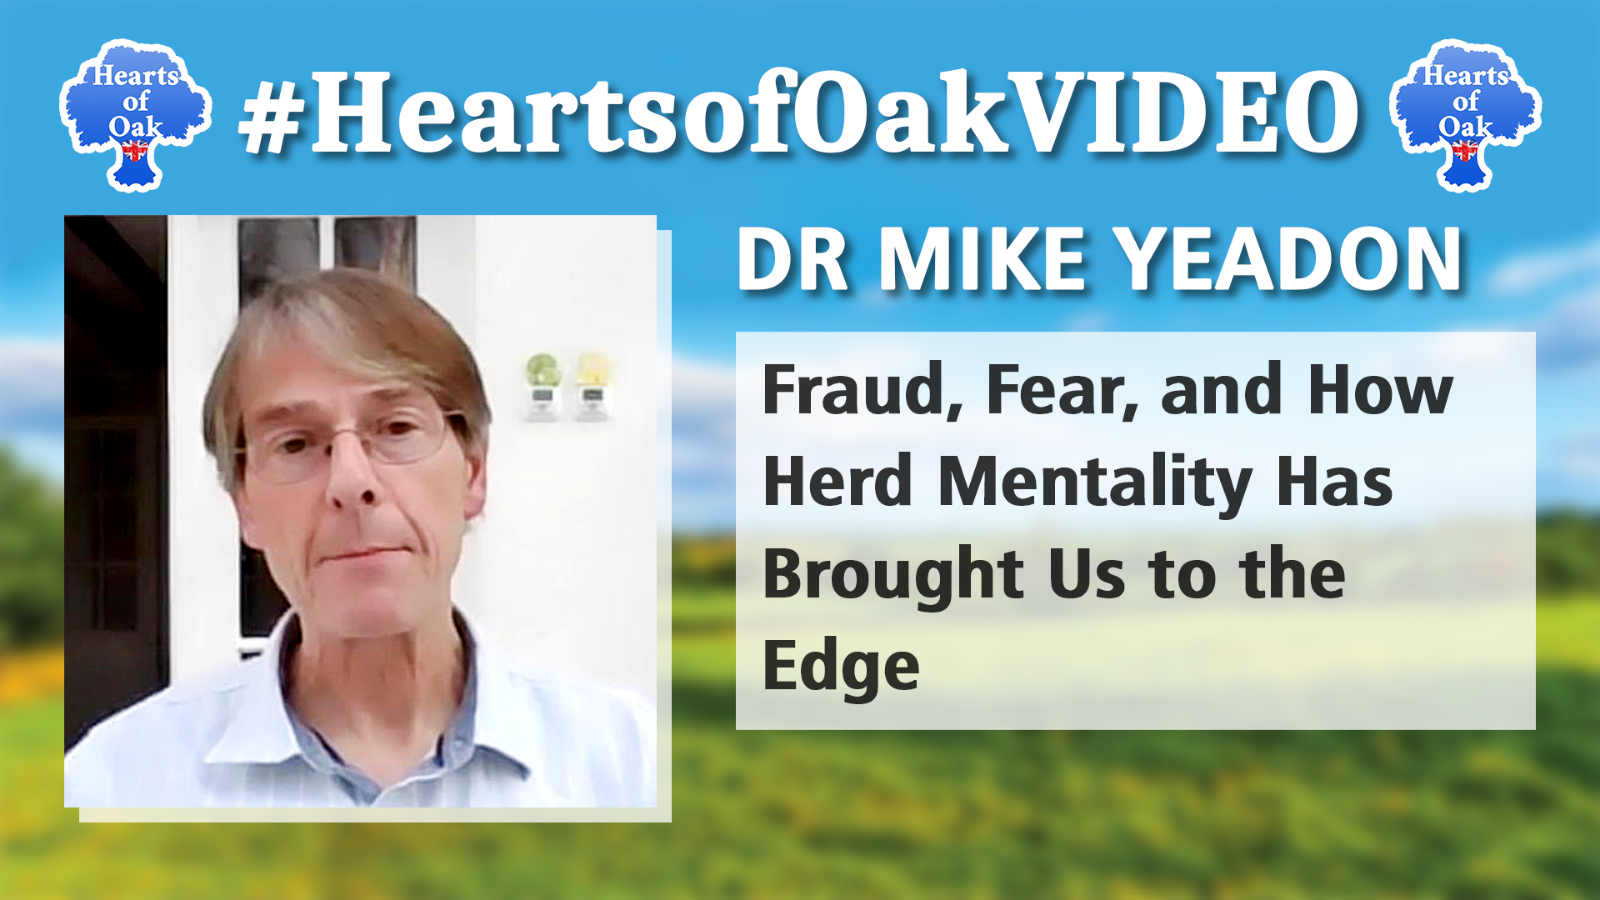 Dr Mike Yeadon - Fraud, Fear and How Herd Mentality Has Brought Us to the Edge